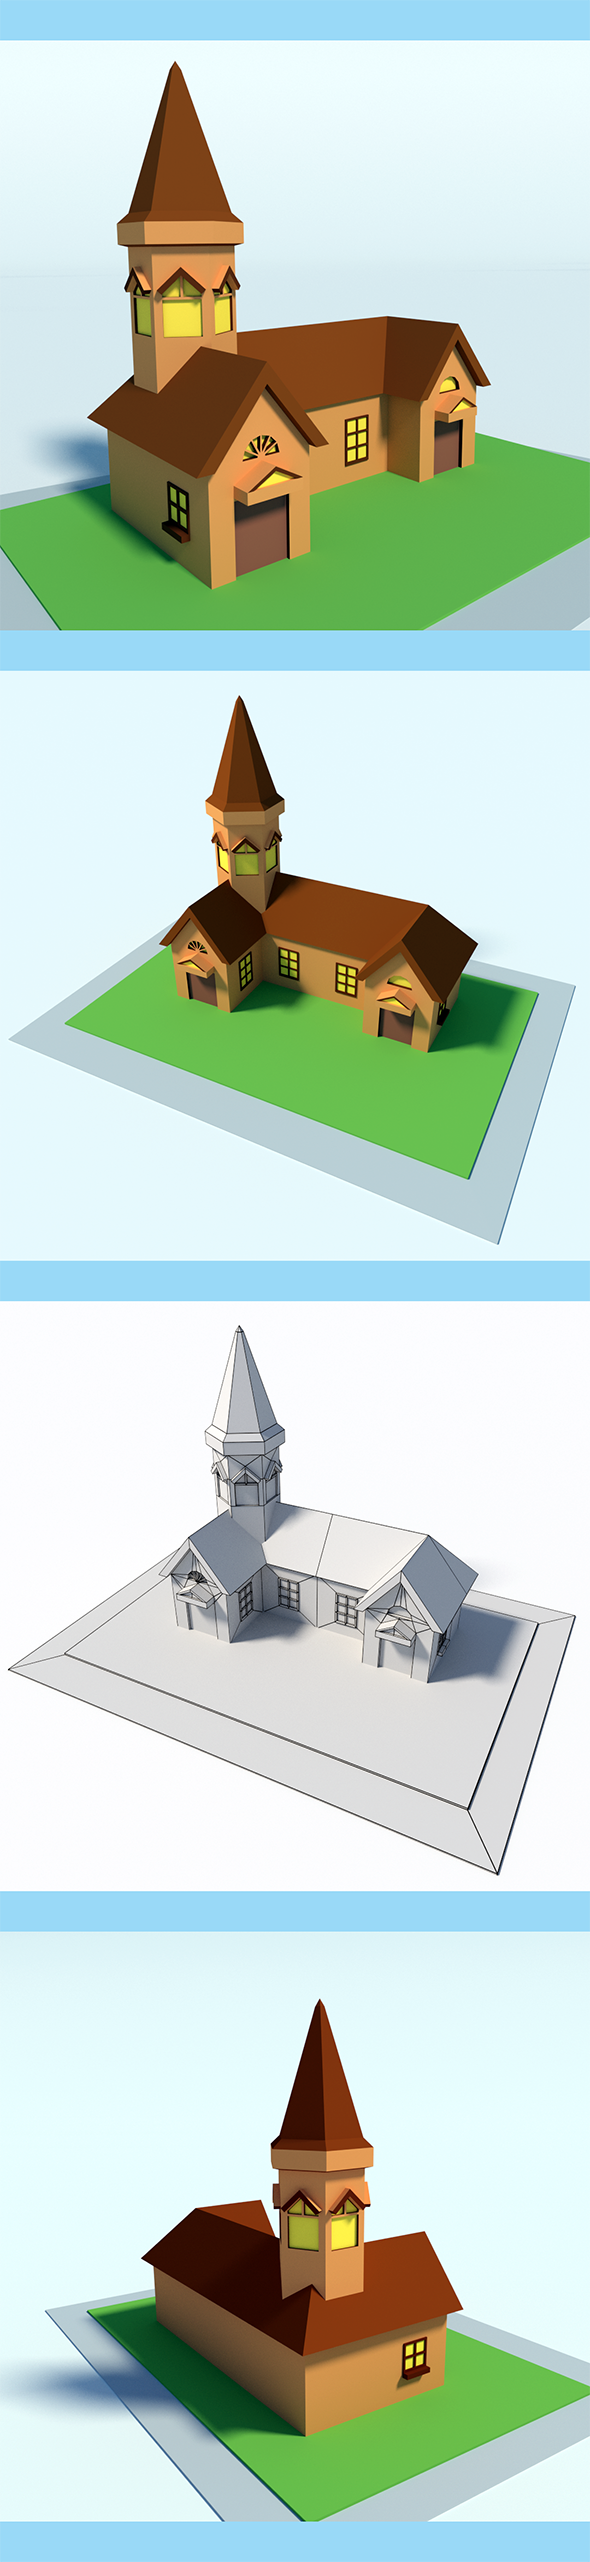 Low Poly House - 3Docean 13344334